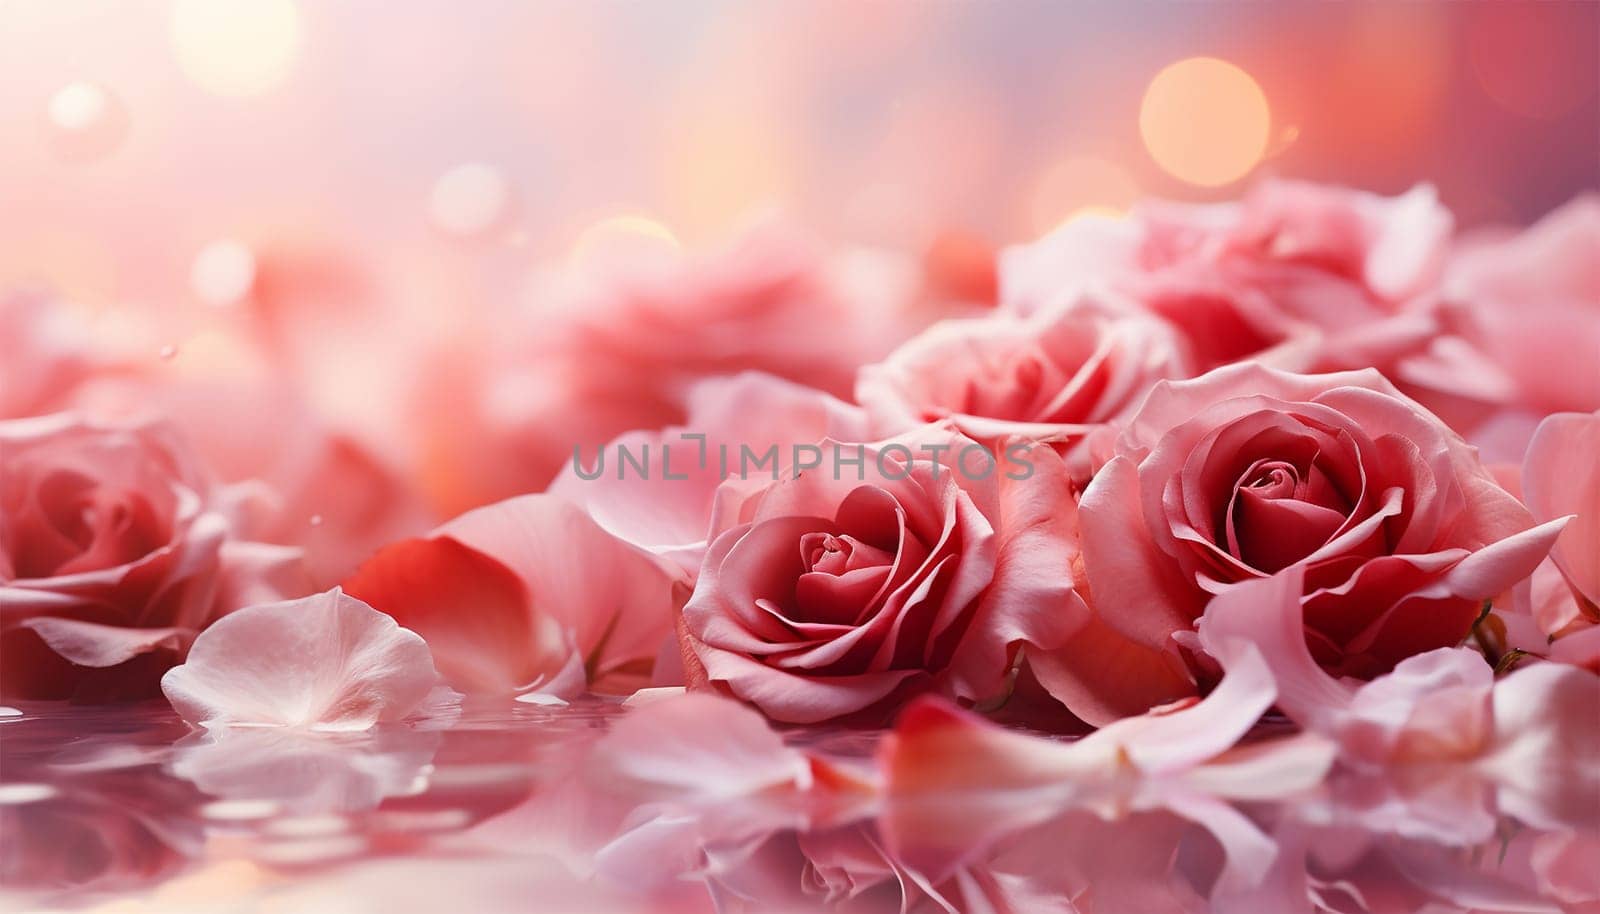 Romantic Valentine background, pink,red rose petals. Valentines Day Heart Made of Red Roses Isolated on White Background. by Annebel146